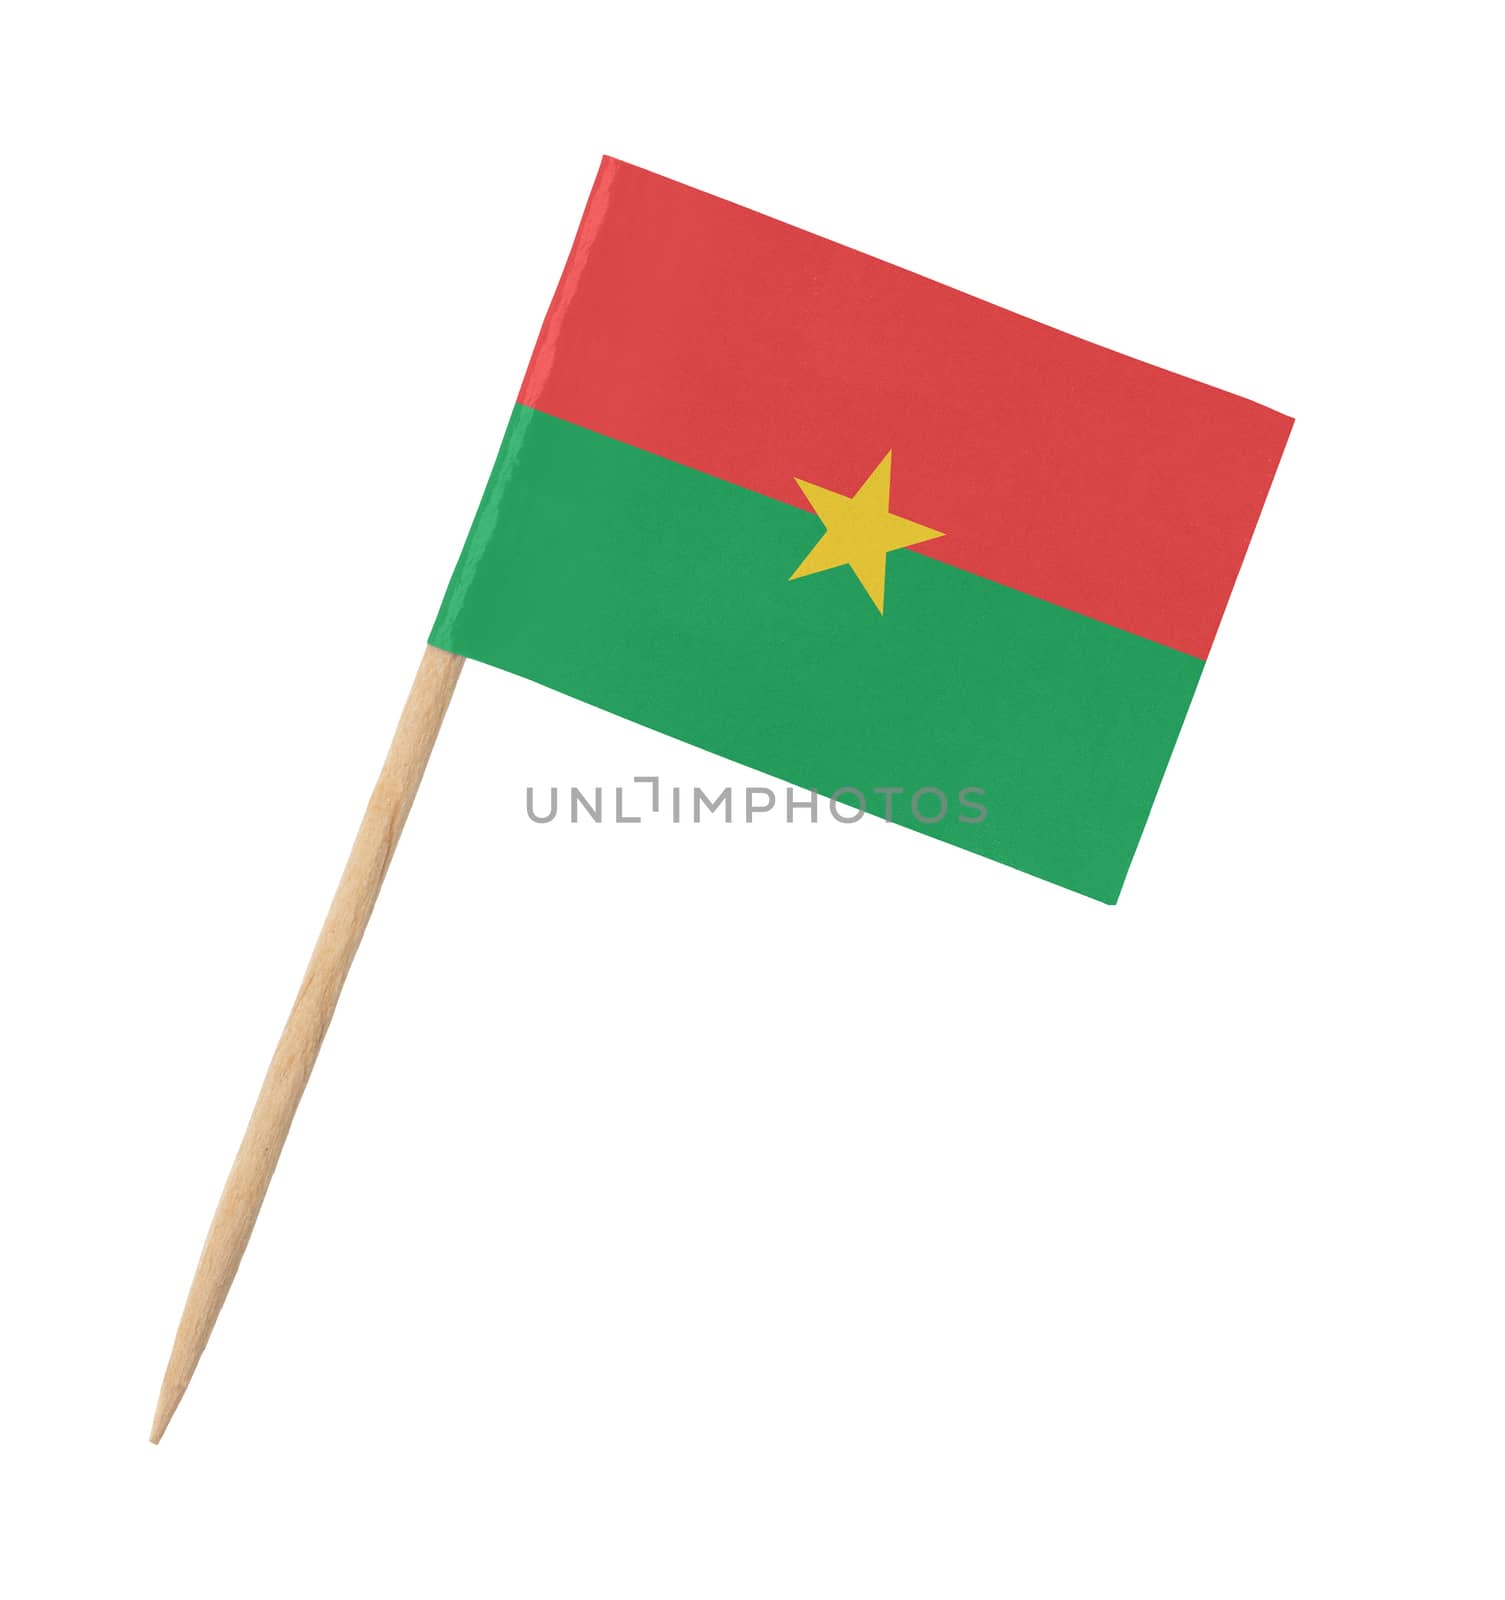 Small paper flag of Burkina Faso on wooden stick by michaklootwijk